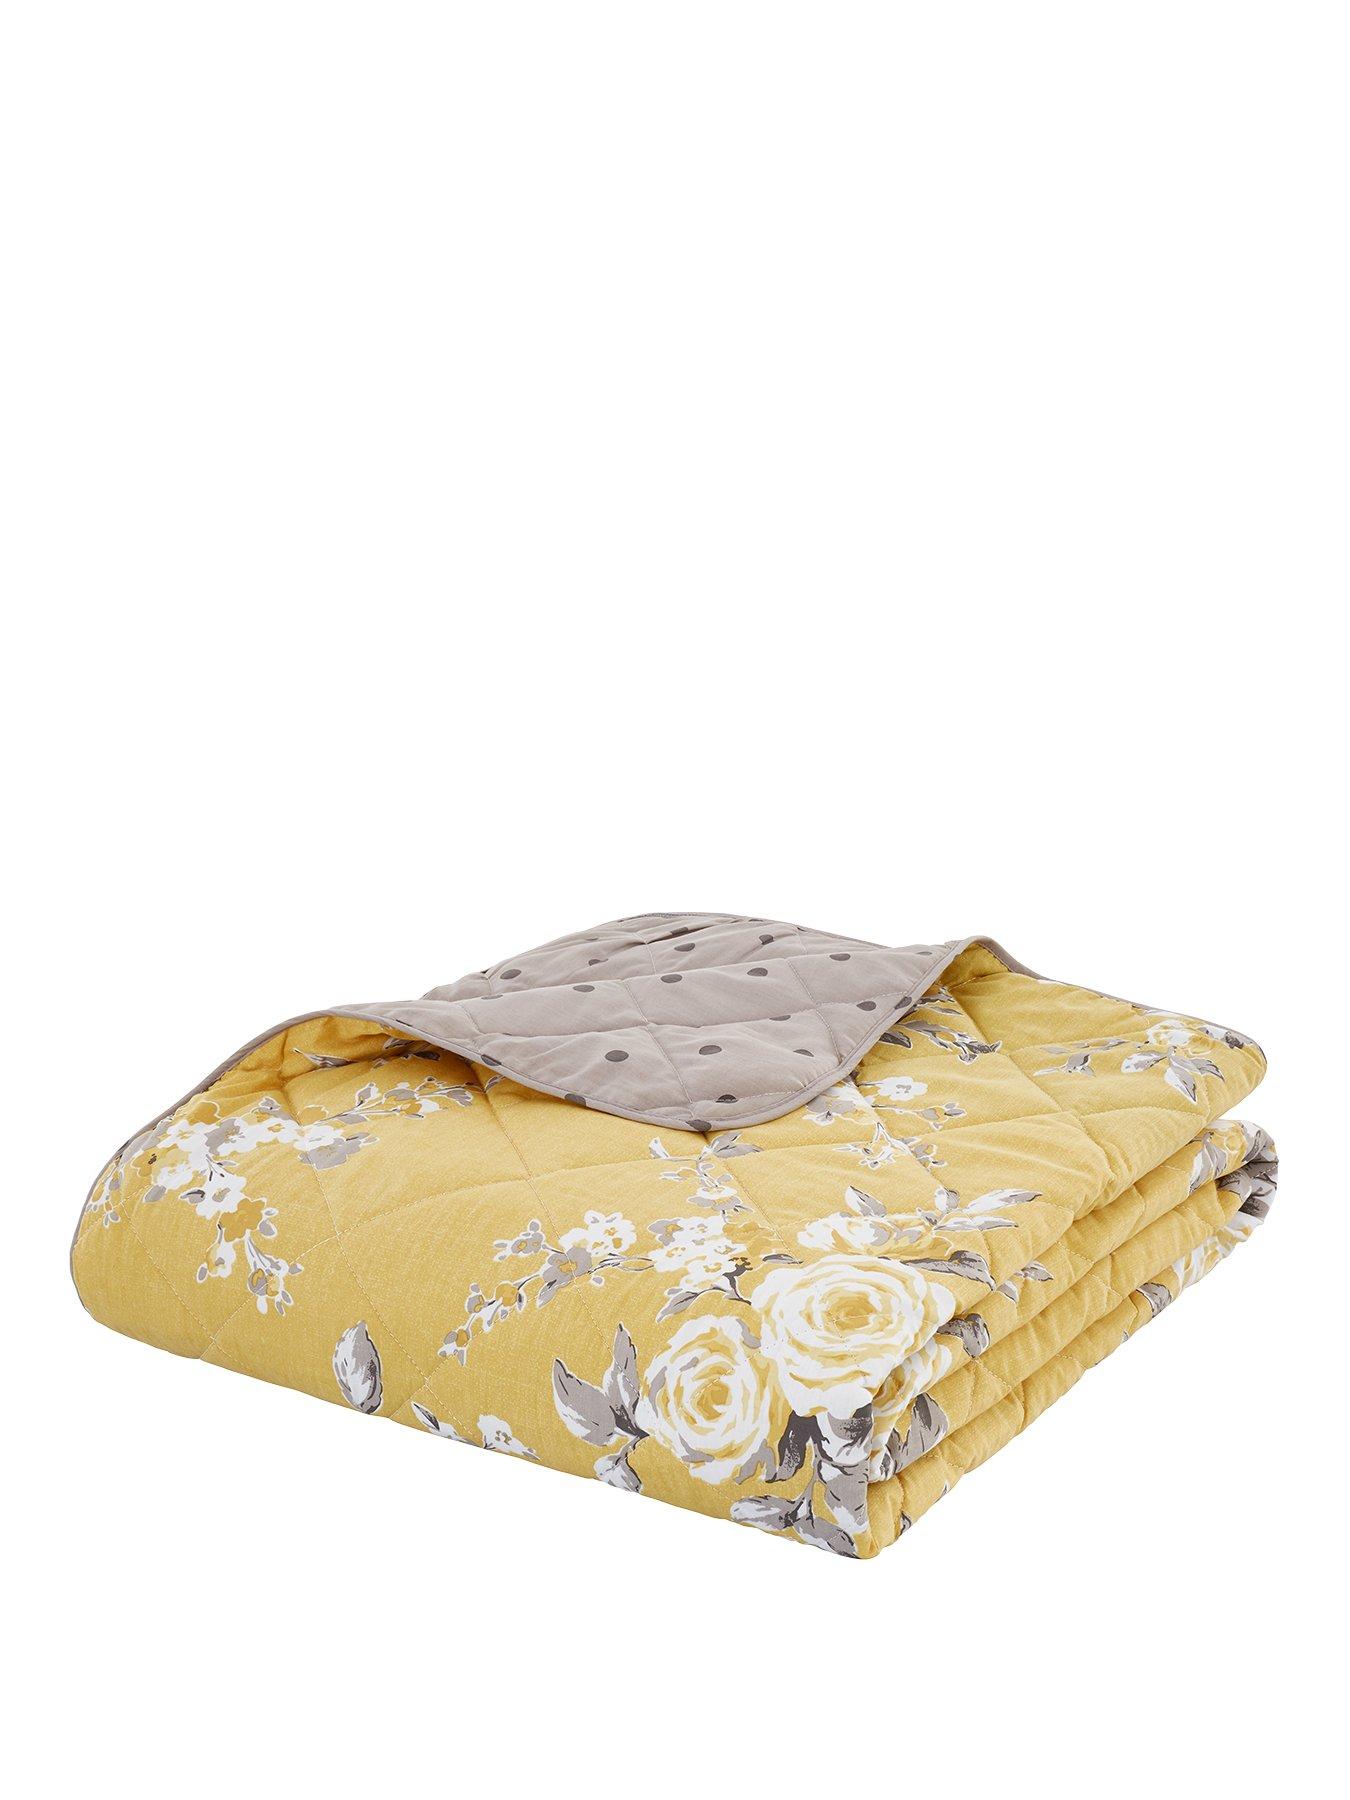 Catherine Lansfield Canterbury Ochre Floral Duvet Cover Bed Set Yellow  Curtains